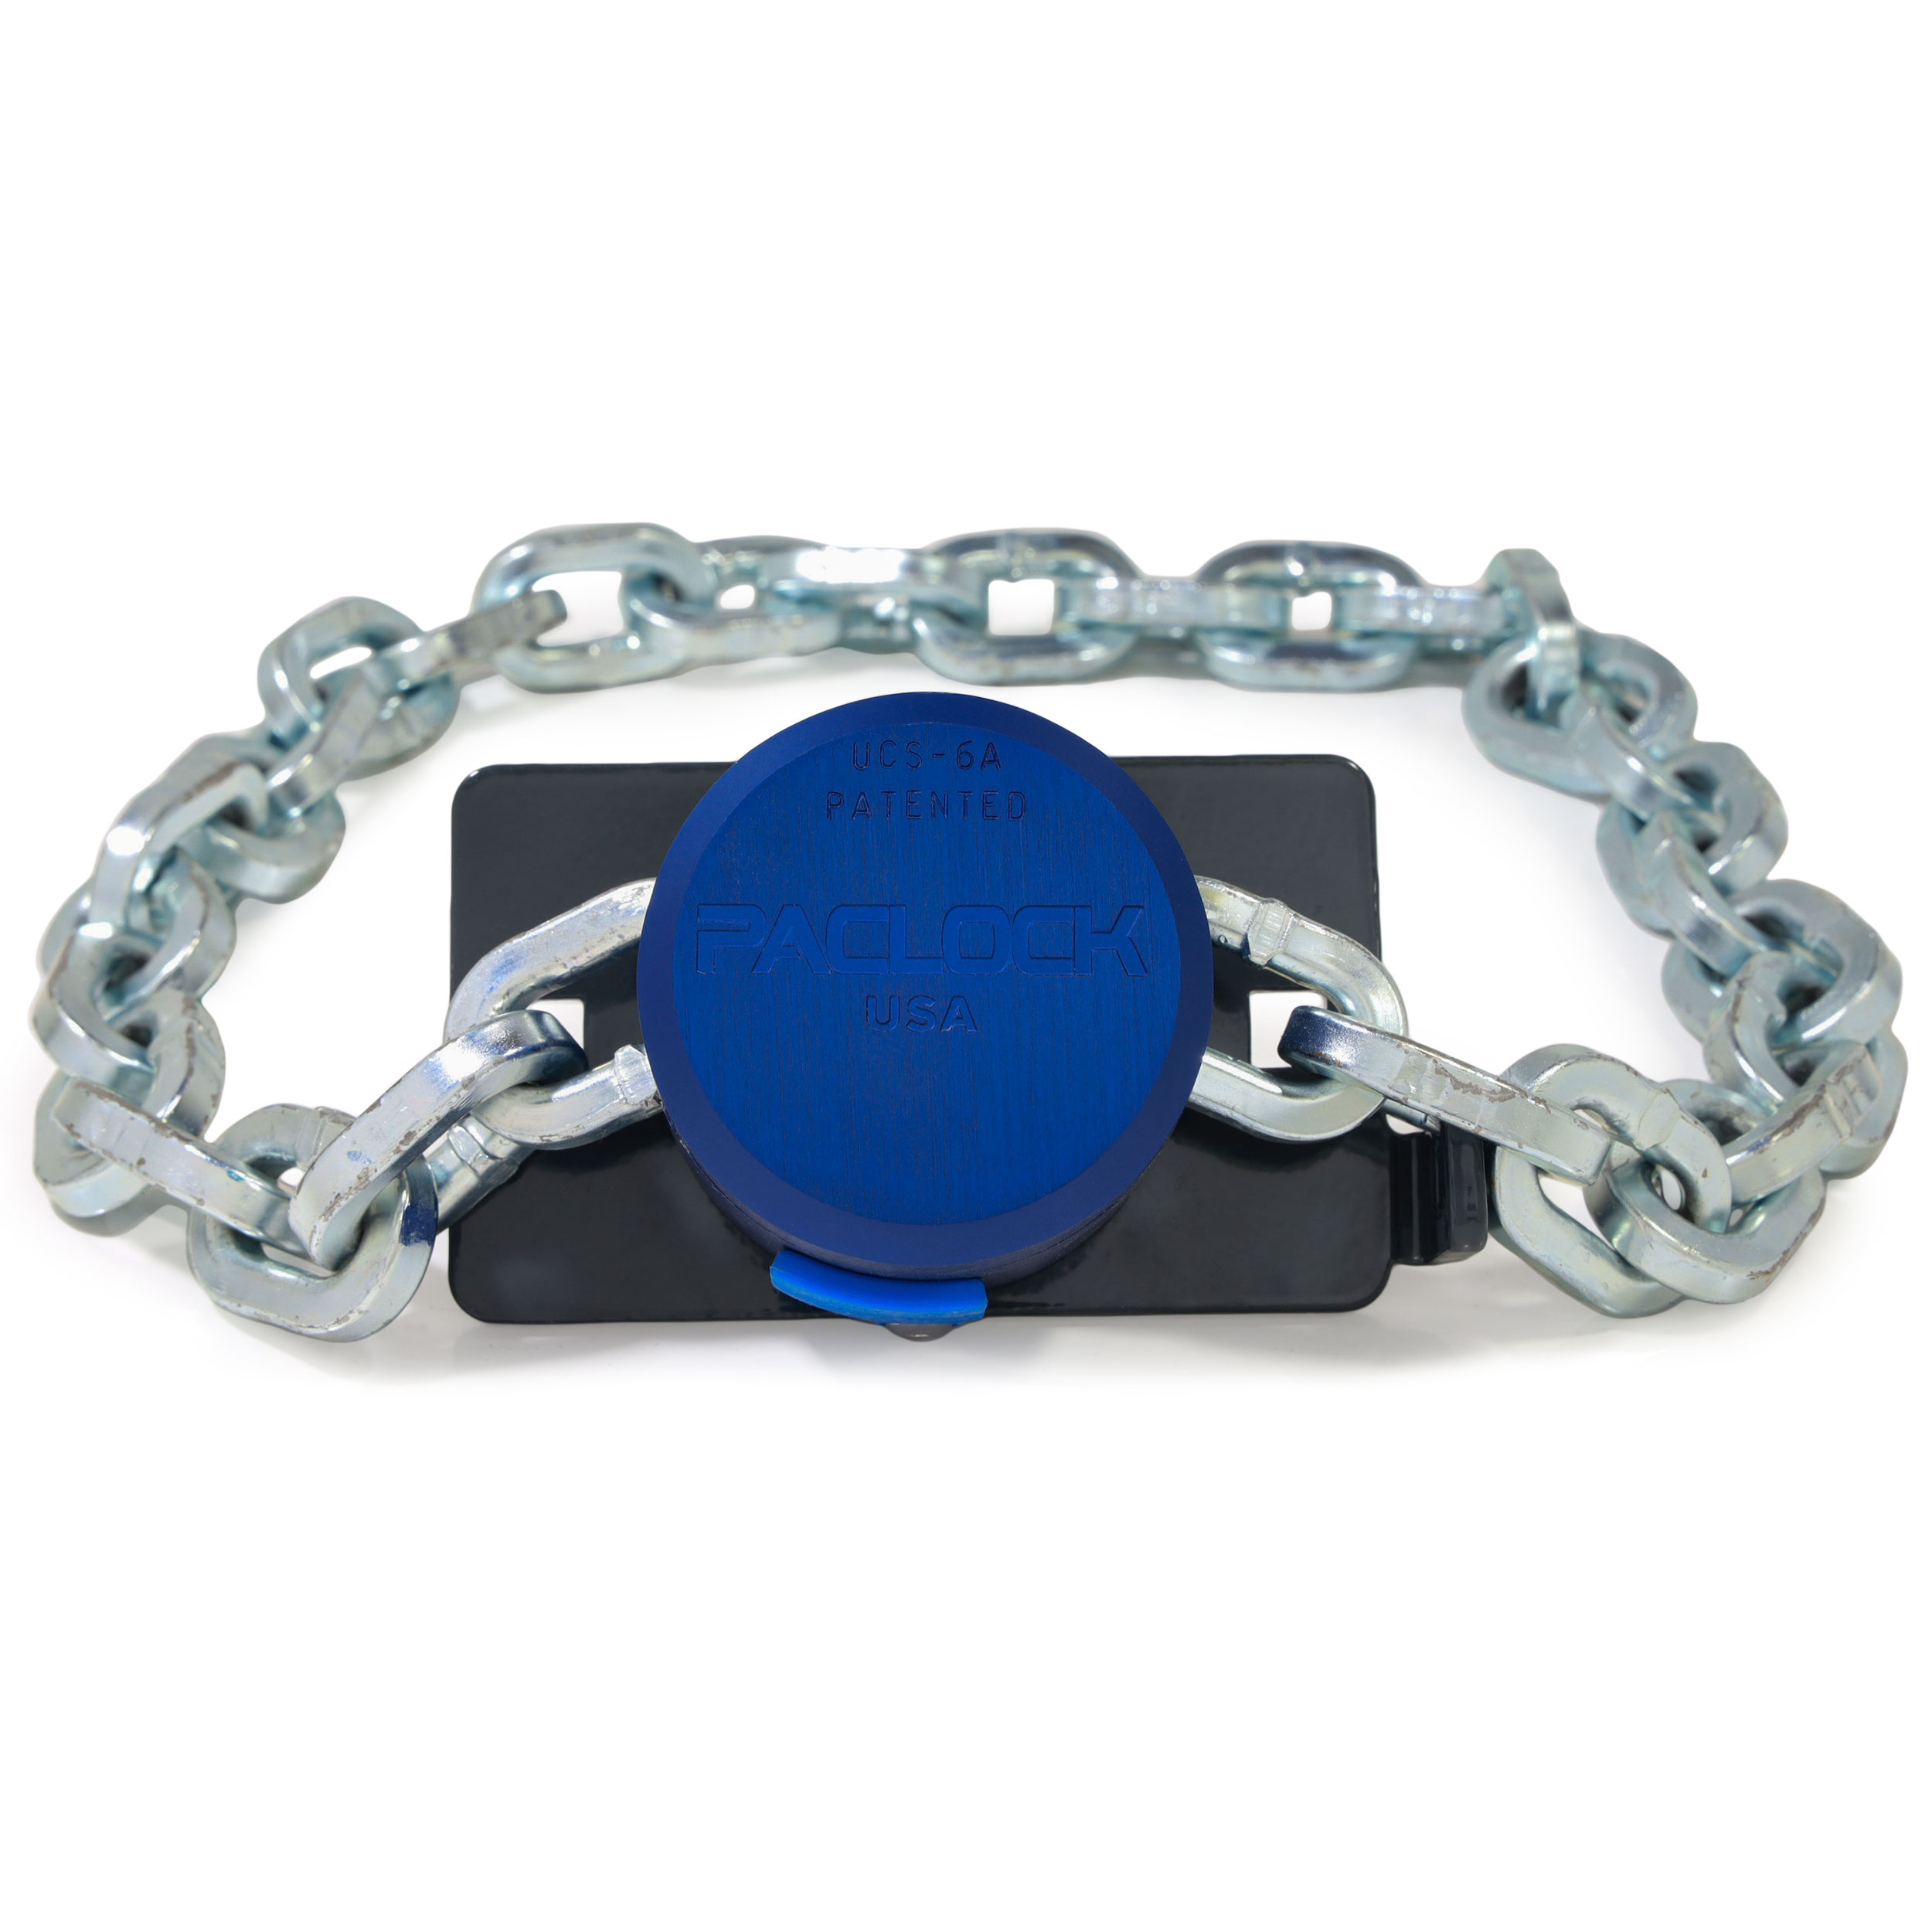 Aluminum Chain Locking System for 8mm Chain - PACLOCK